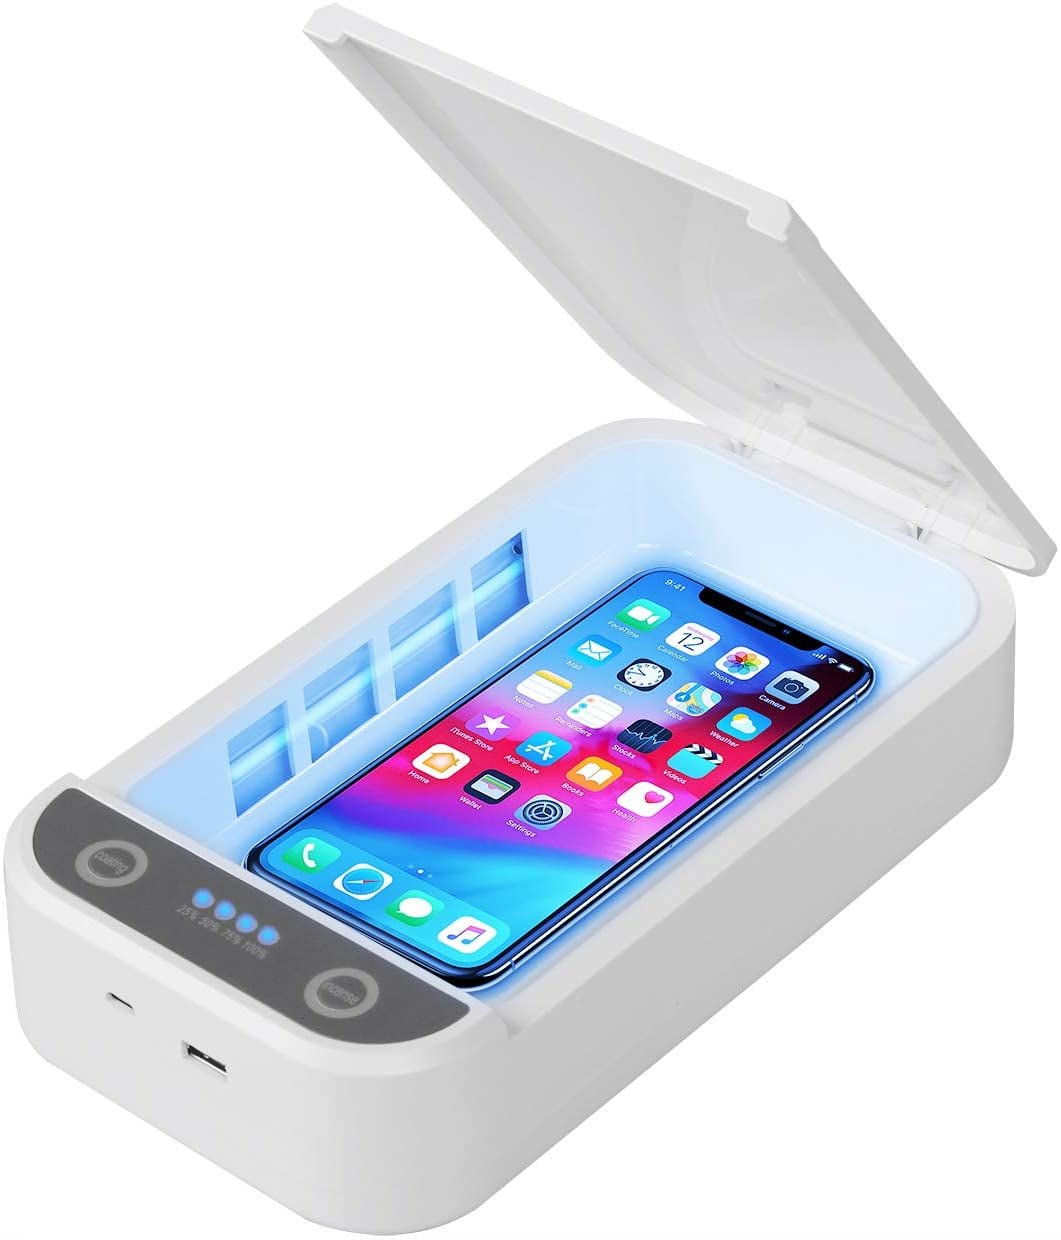 Multi-use Cell Phone Disinfector for iOS Android Smart Phone Toothbrush Jewelry,Blue DZJ Portable UV Phone Sanitizer Phone Cleaner Case with Aromatherapy Function 